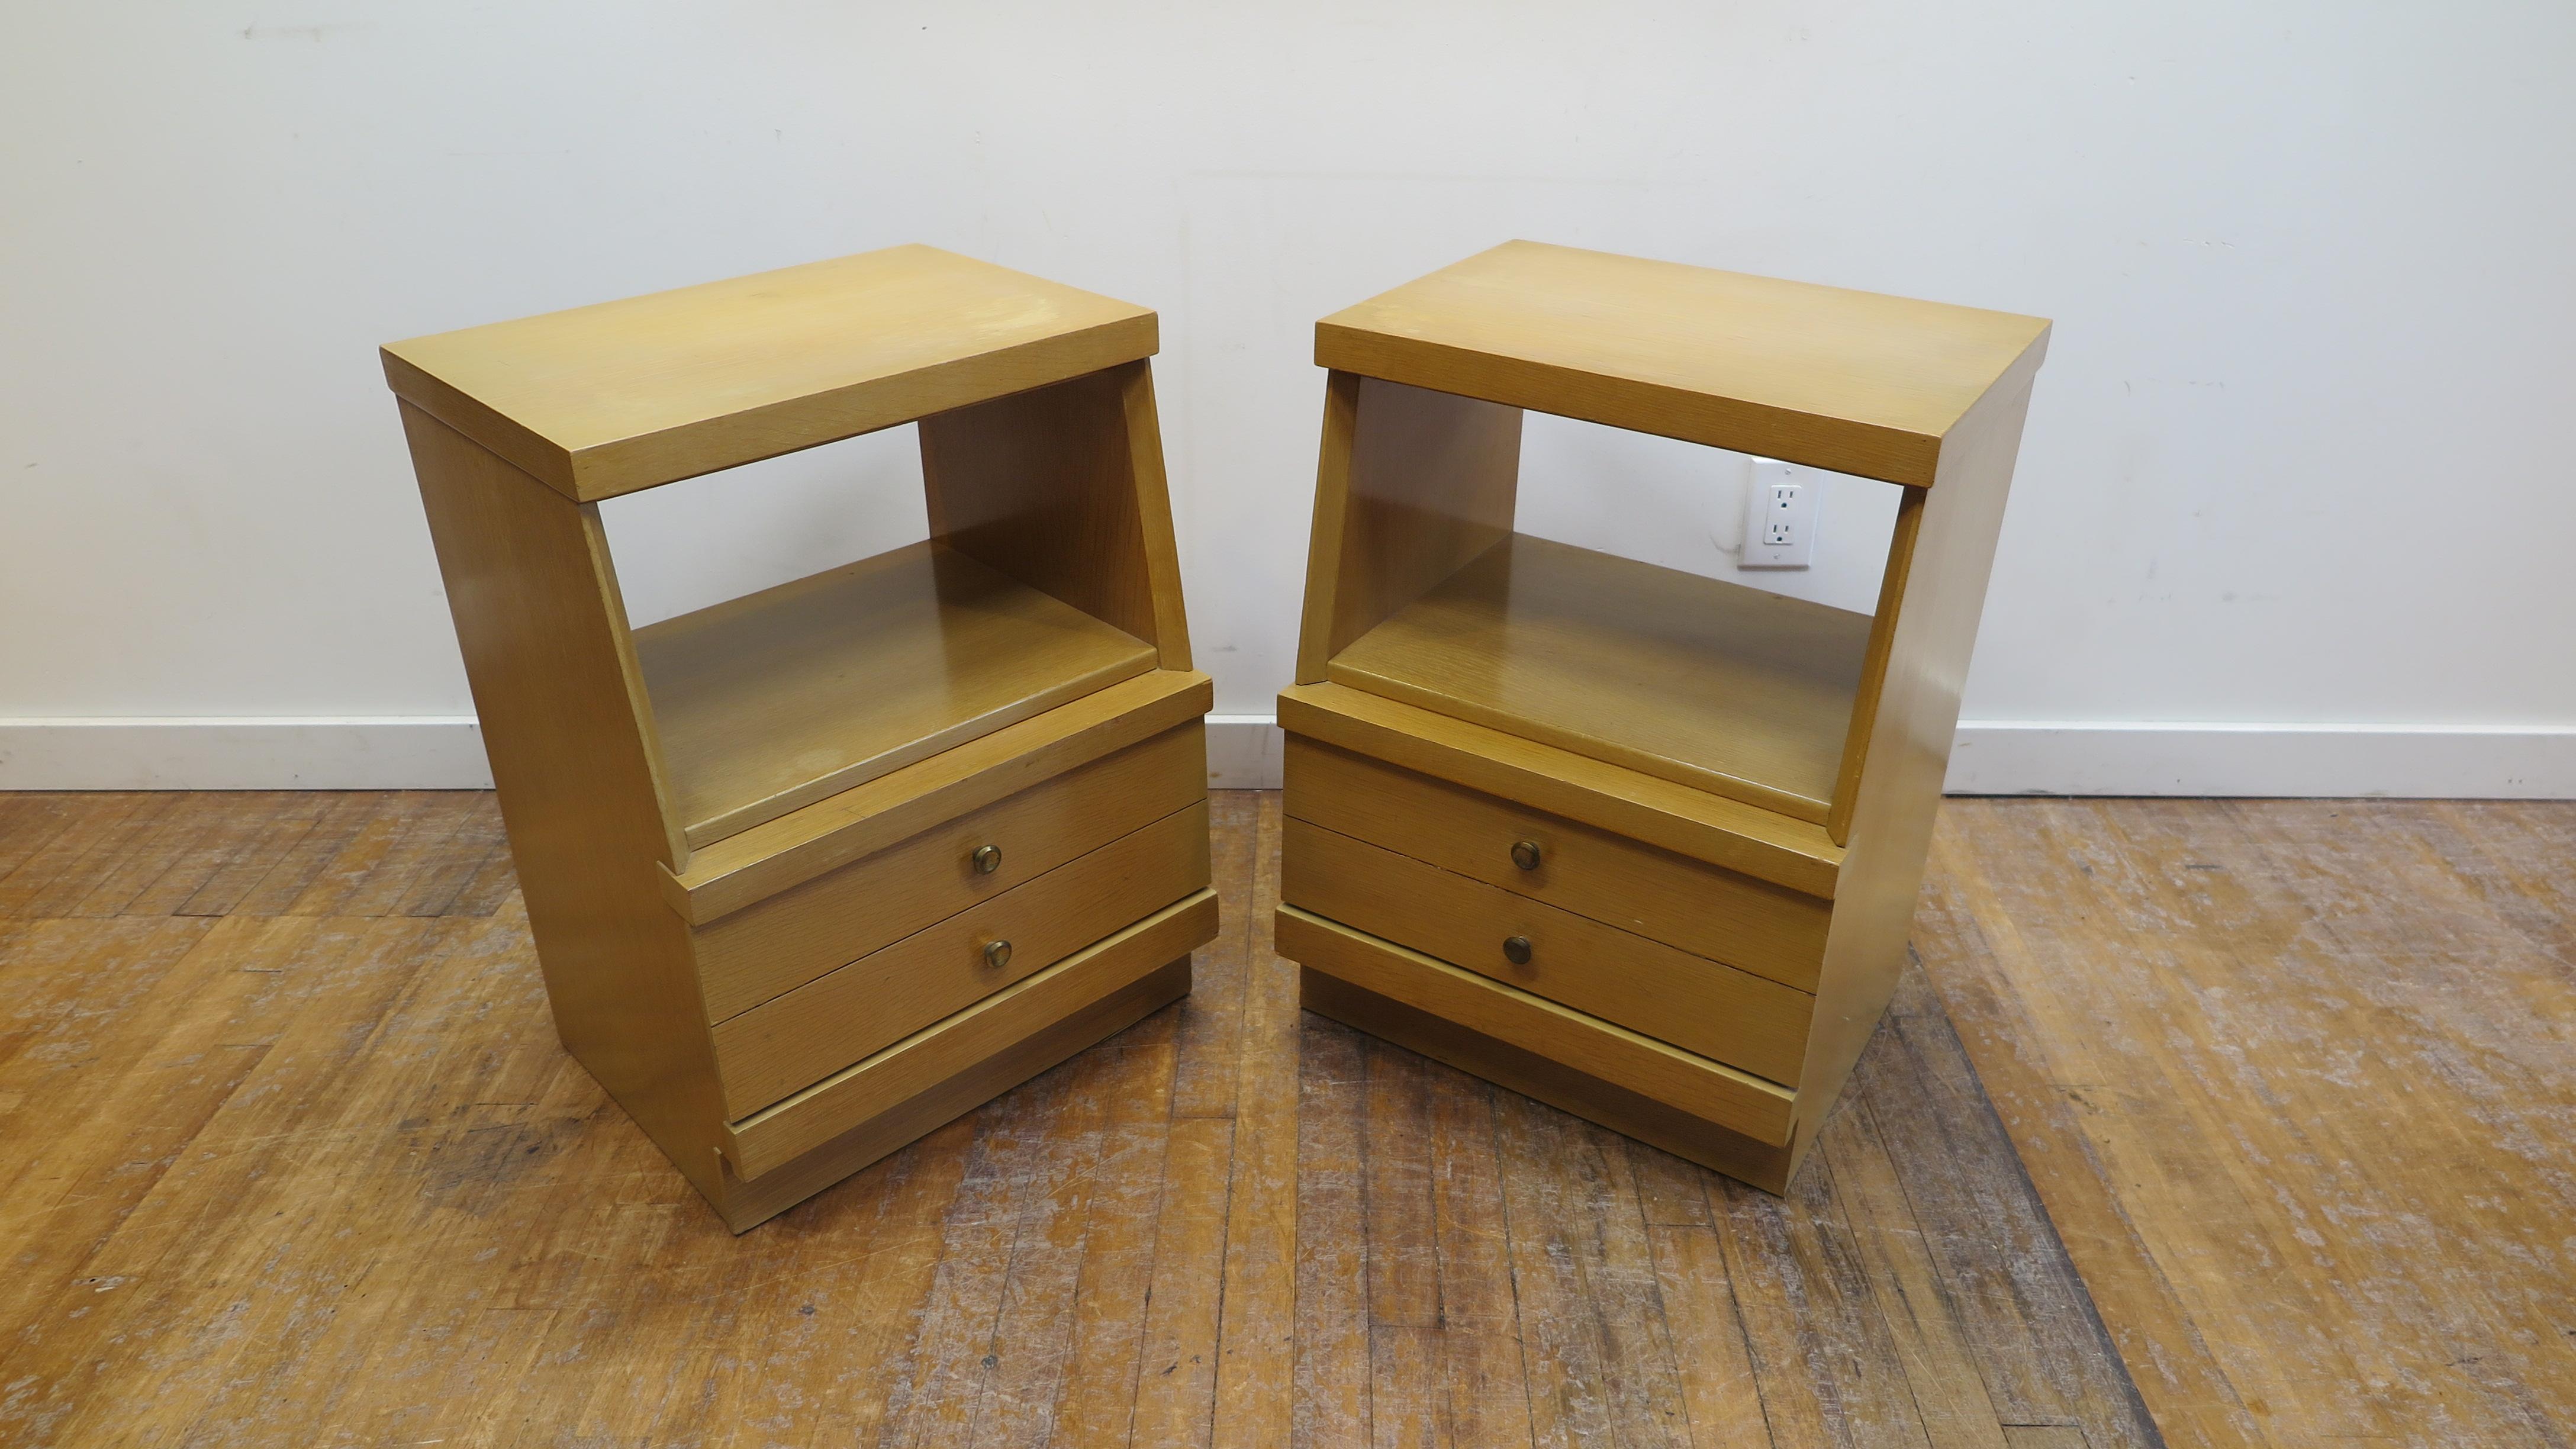 Pair of mid century night stands. Two golden oak colored night stand and or side tables, end tables. Clean lines with tops set back angled profile stance. Having middle shelf and one lower drawer with brass pulls. In good to fair condition, some